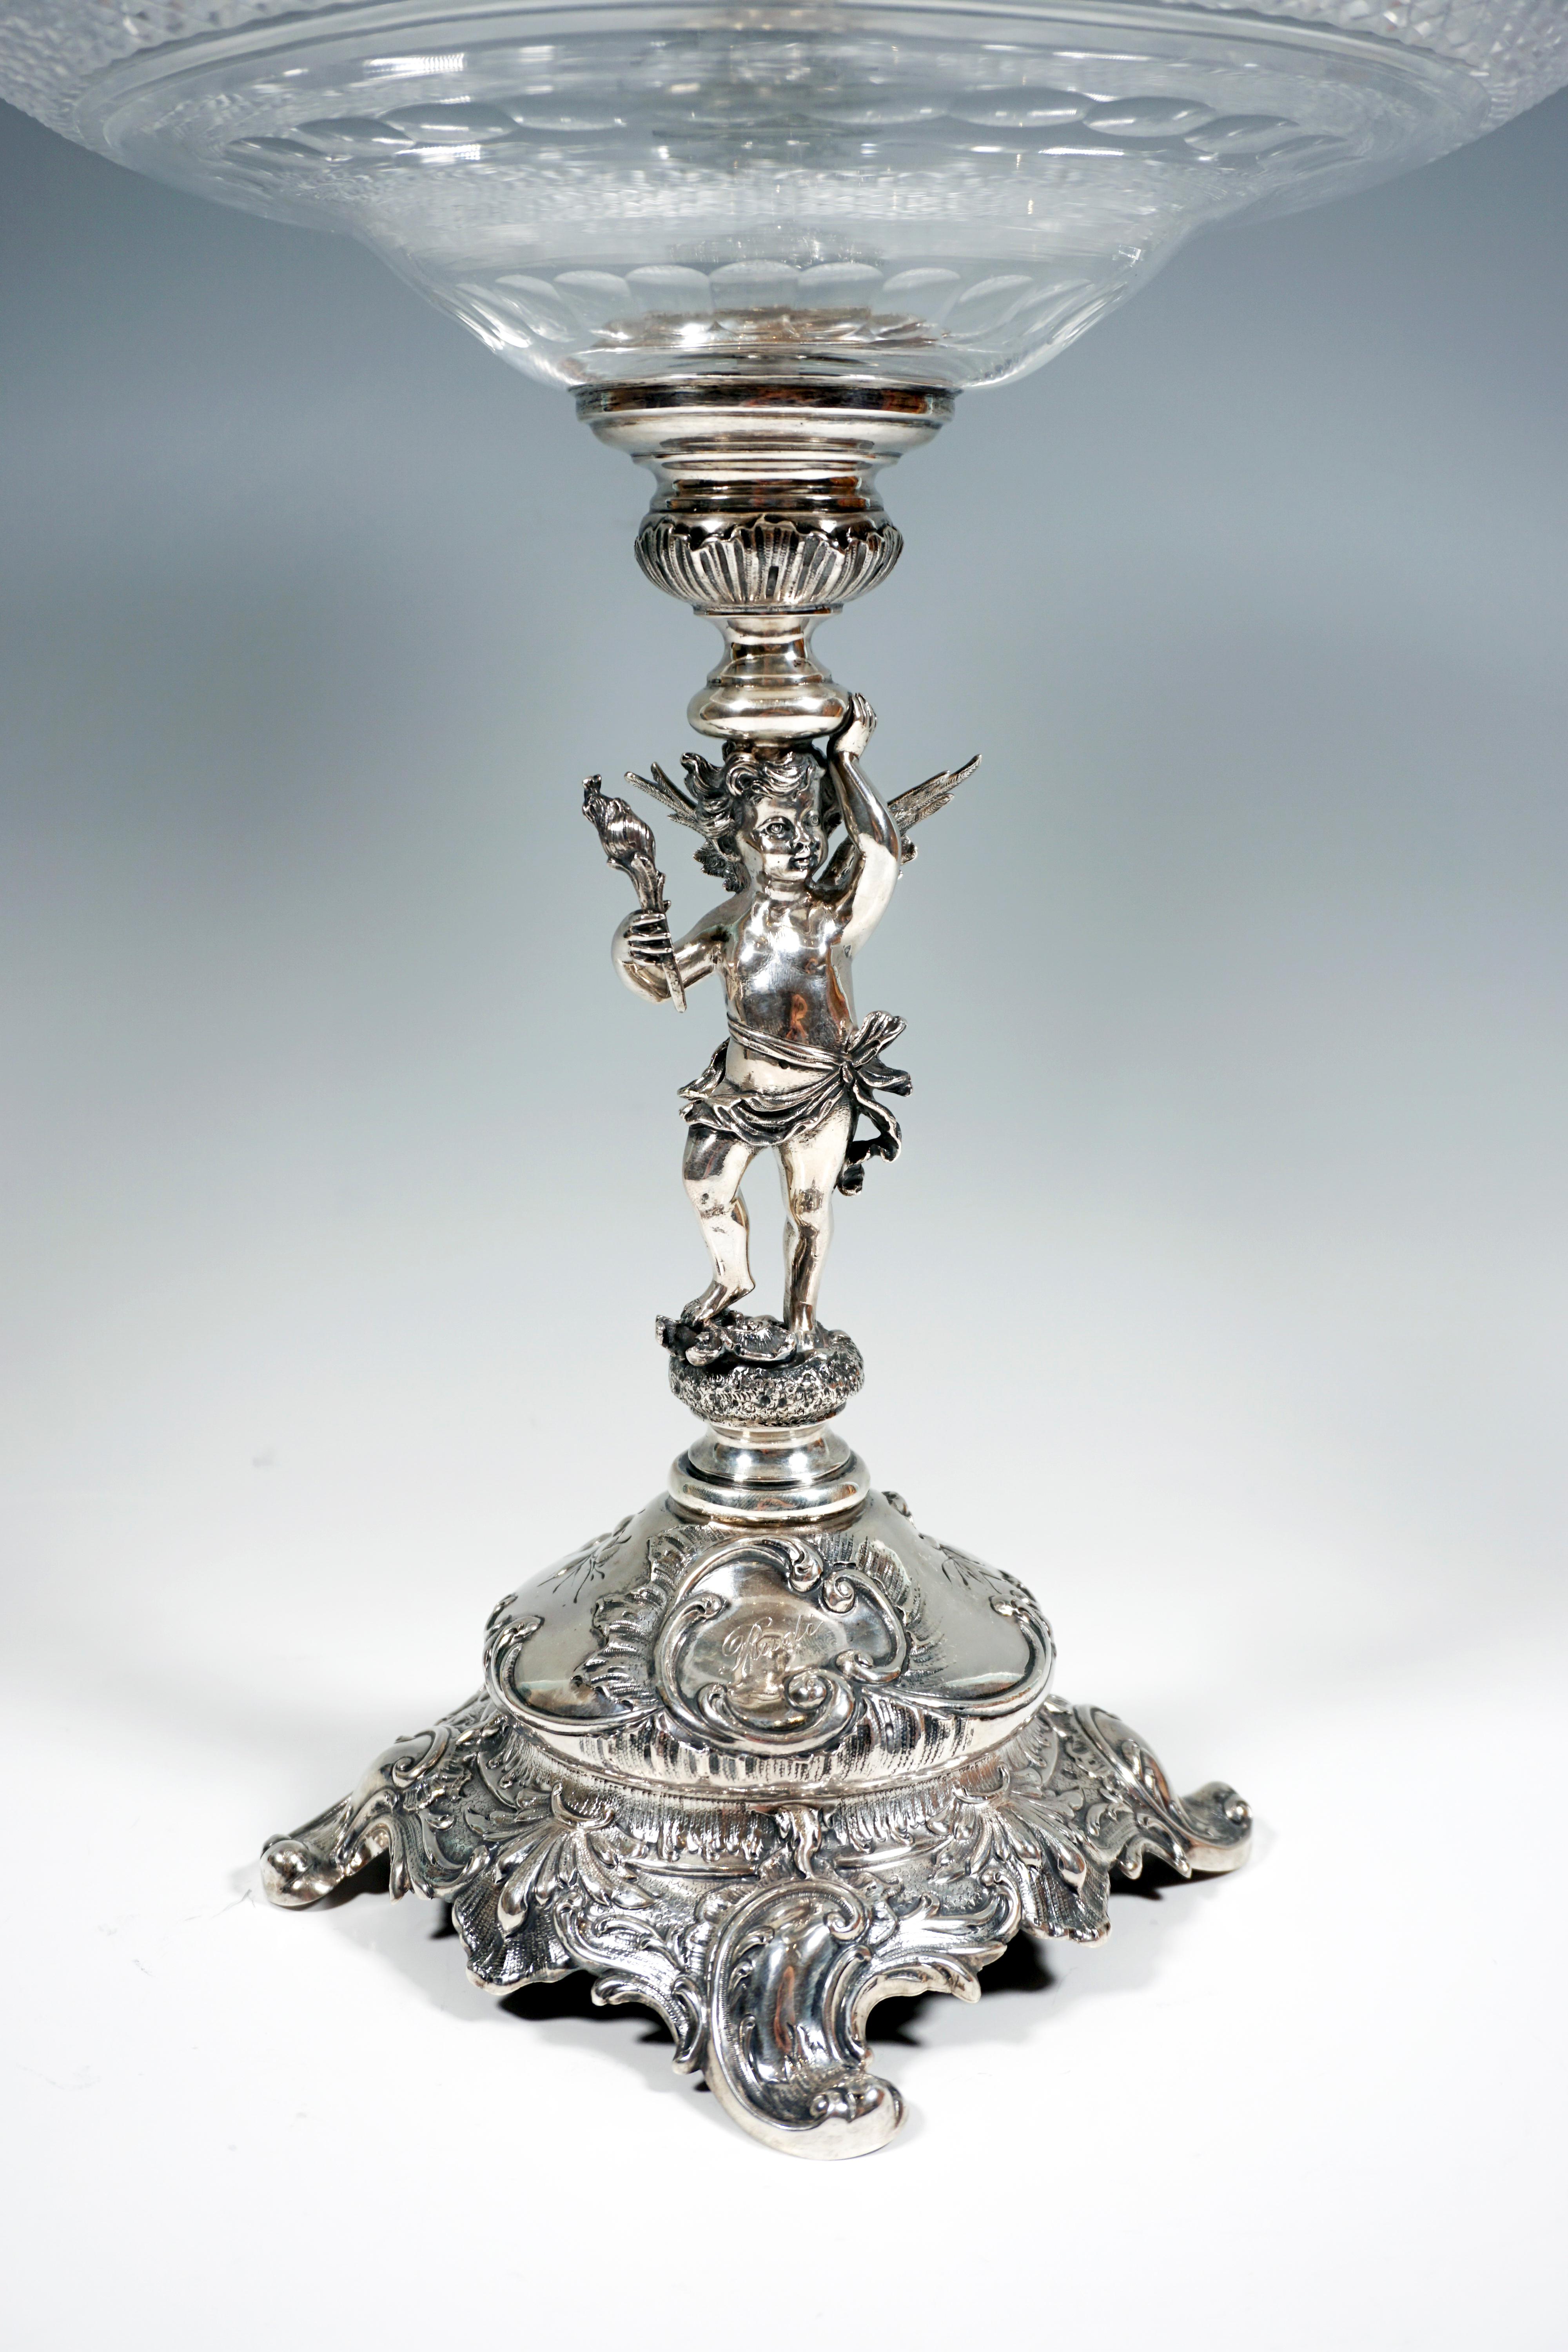 Hand-Crafted Art Nouveau Vienna Silver Centerpiece with Cupid as a Bowl Carrier, Around 1900